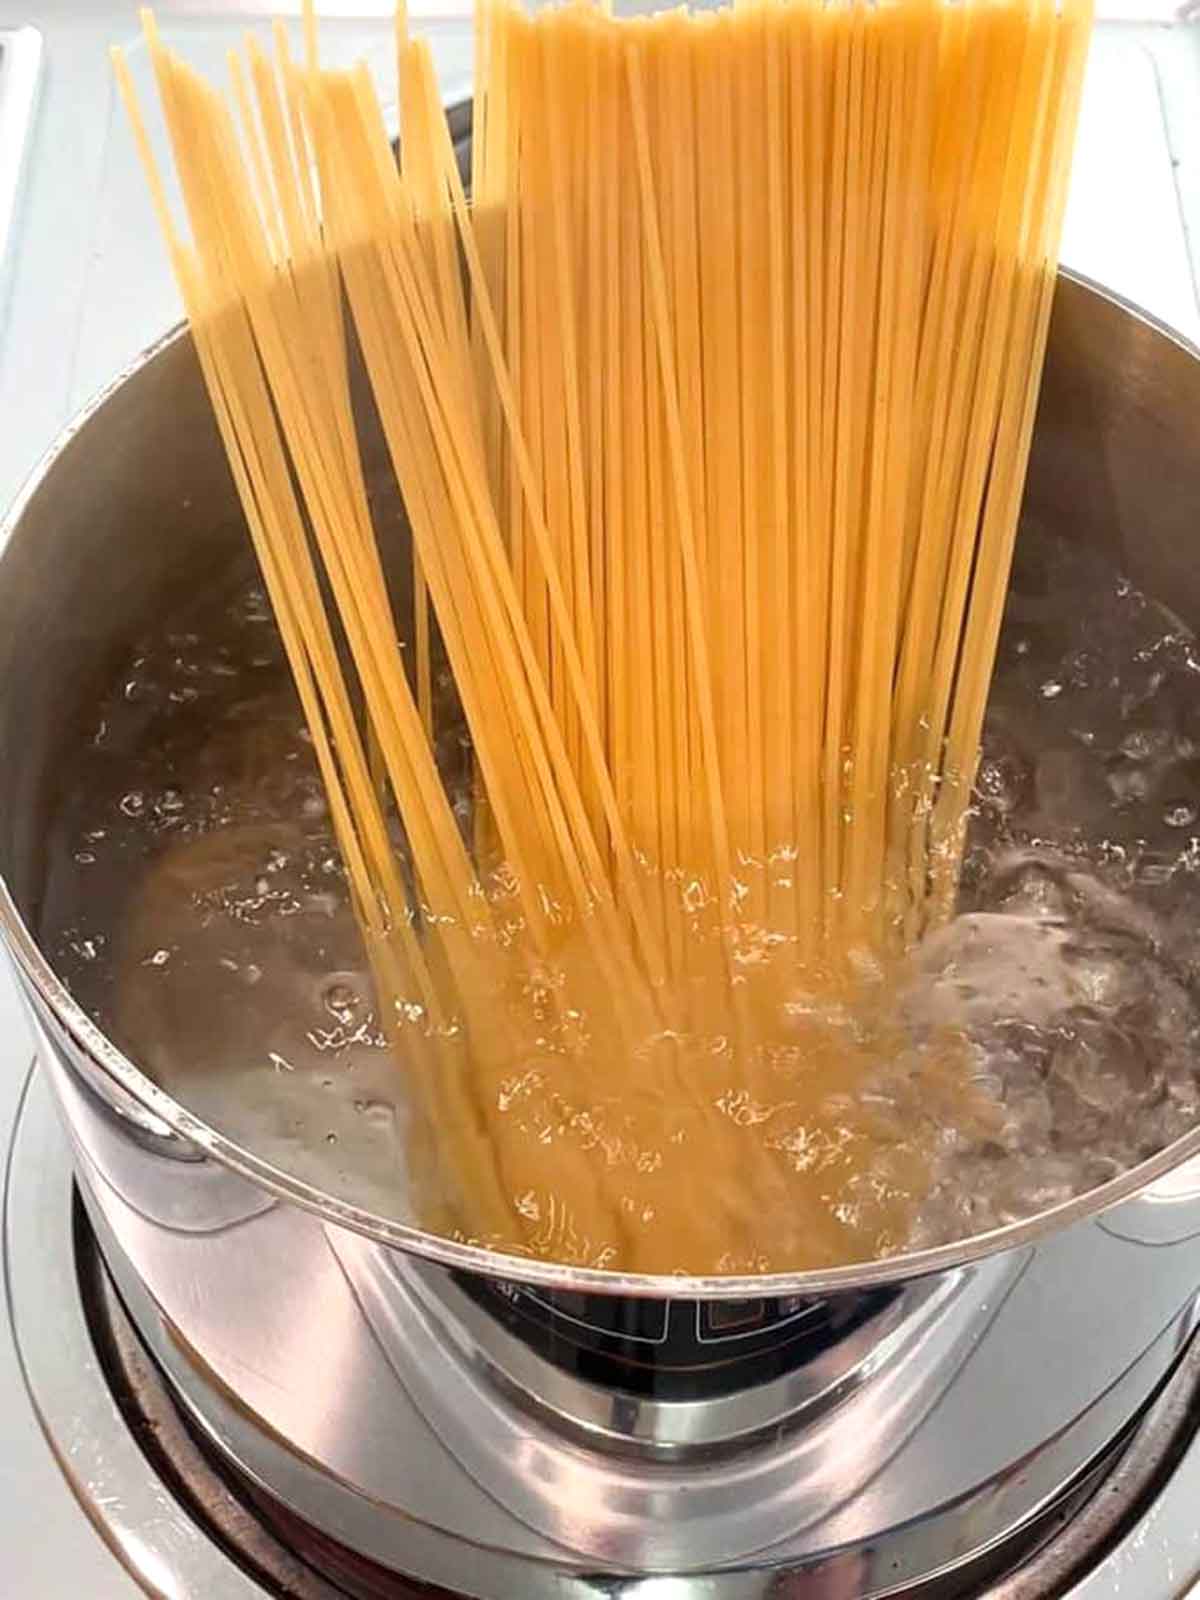 Cooking spaghettin in a pot of boiling water.